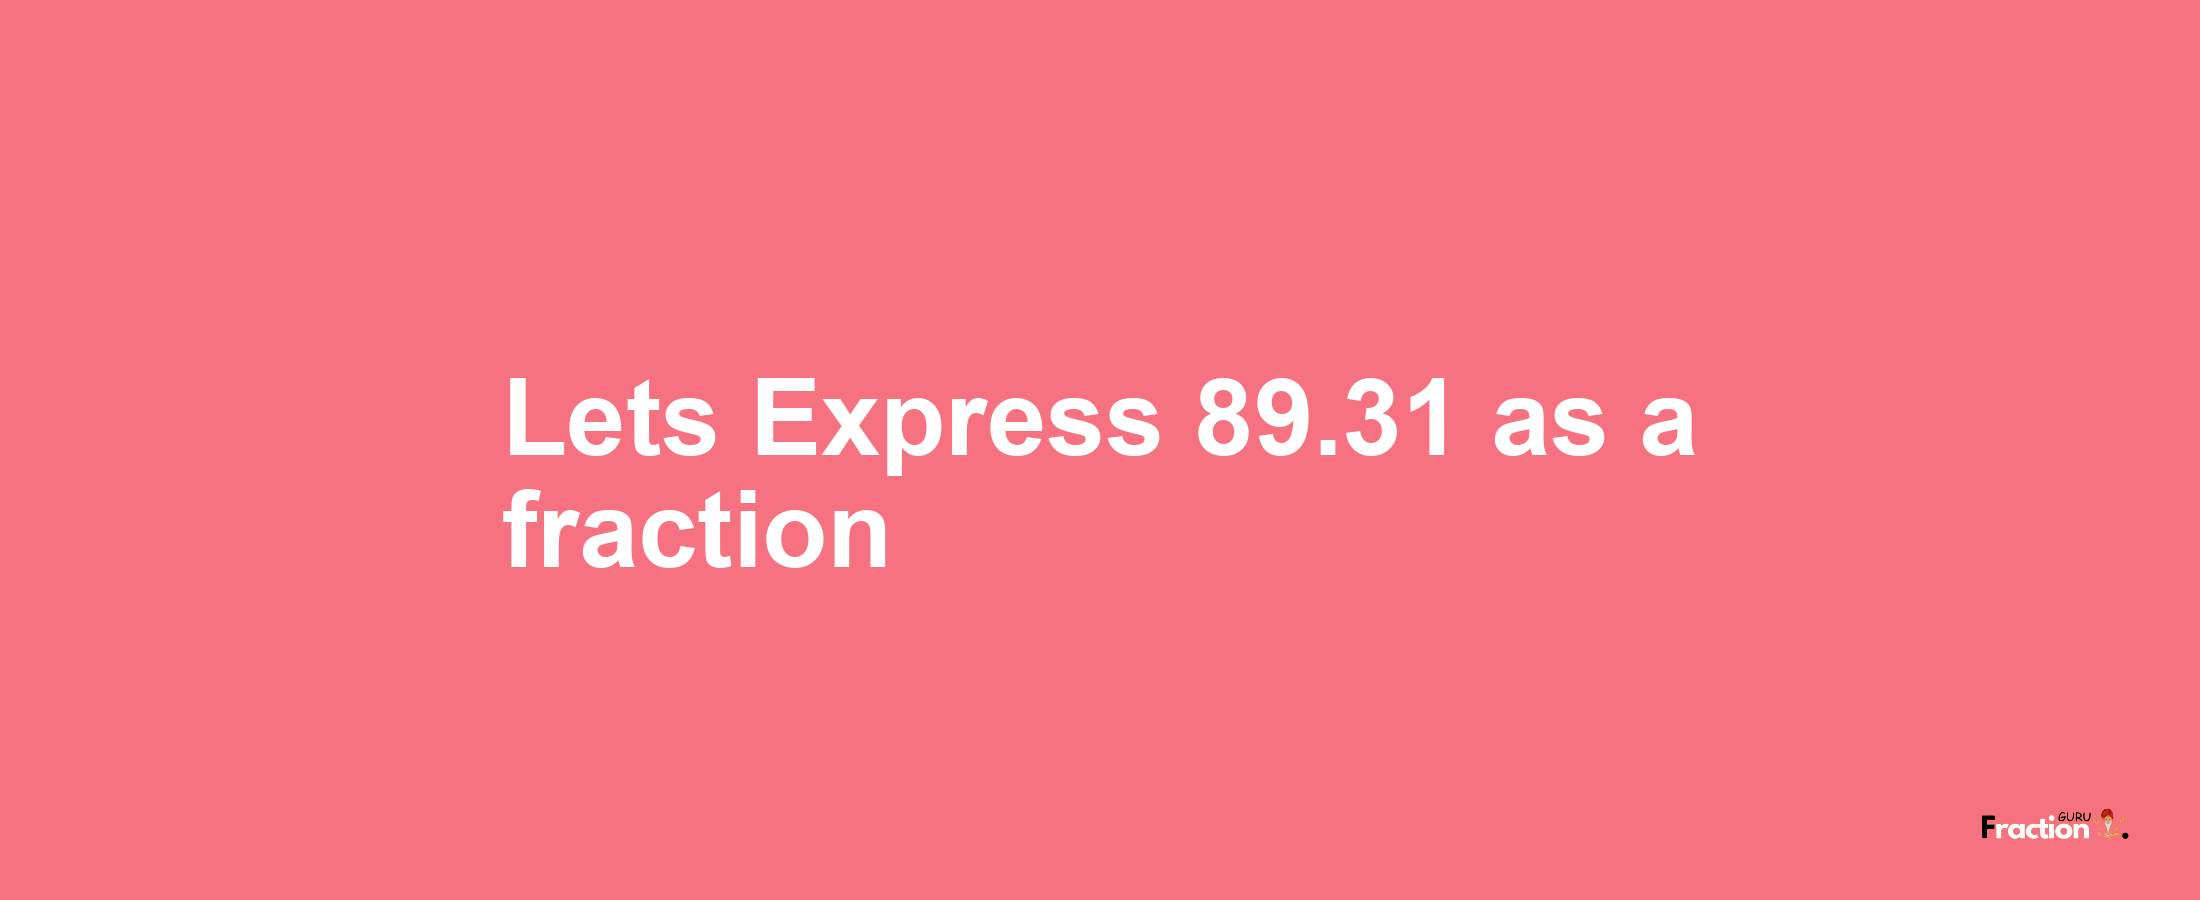 Lets Express 89.31 as afraction